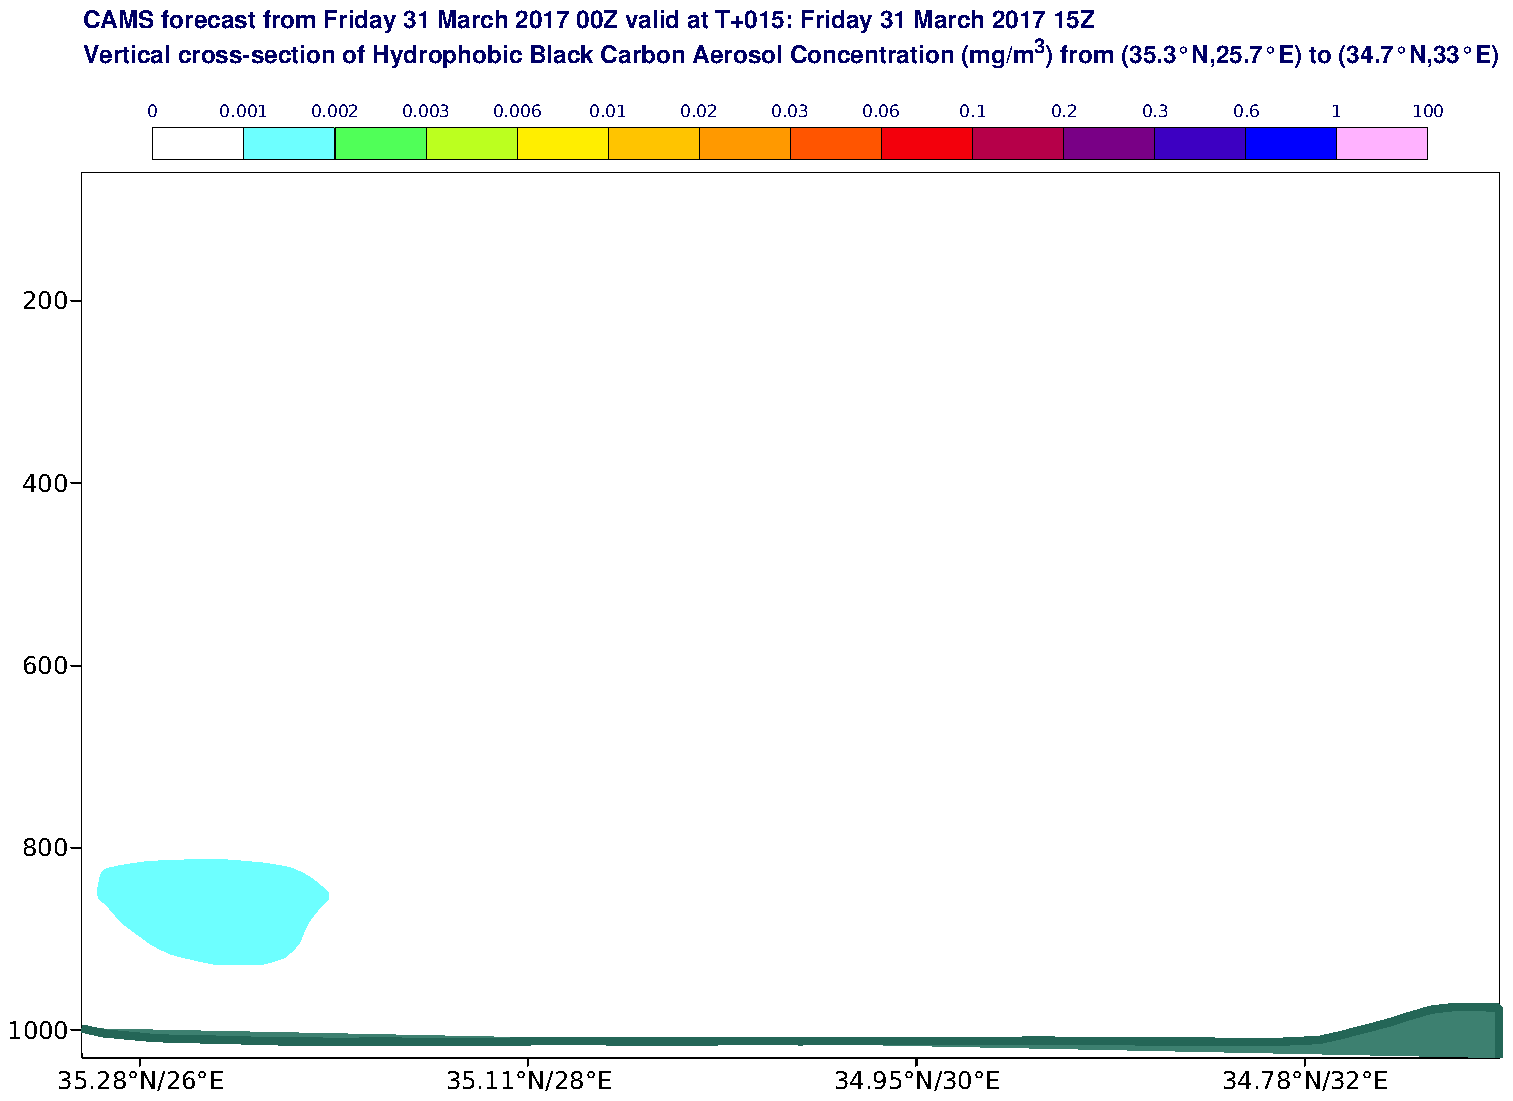 Vertical cross-section of Hydrophobic Black Carbon Aerosol Concentration (mg/m3) valid at T15 - 2017-03-31 15:00